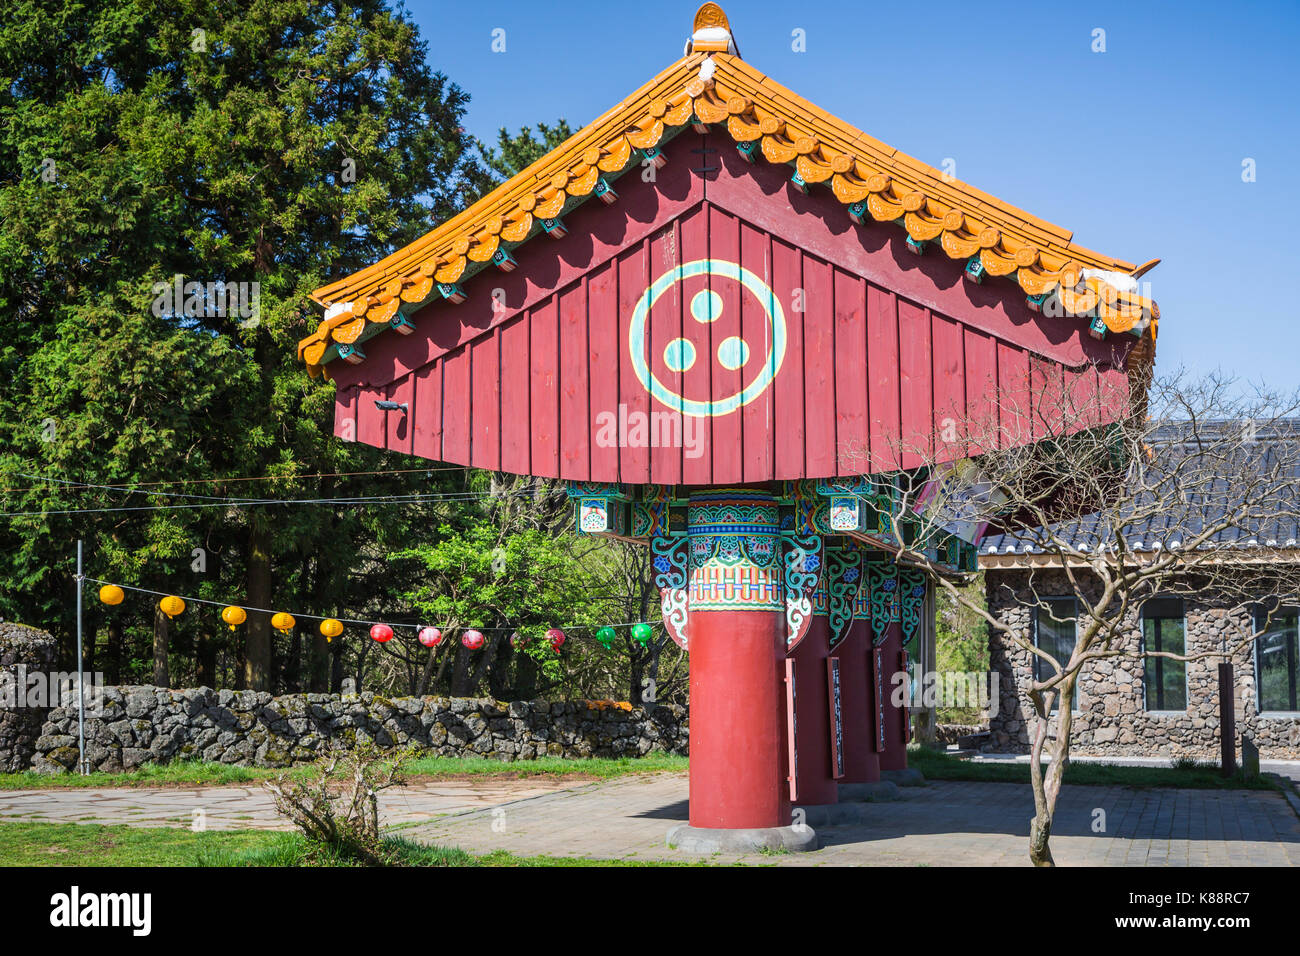 The entrance to the Gwaneumsa Temple at the foot of Mt. Halla in Ara-dong in Jeju City, Jeju Island, South Korea, Asia. Stock Photo